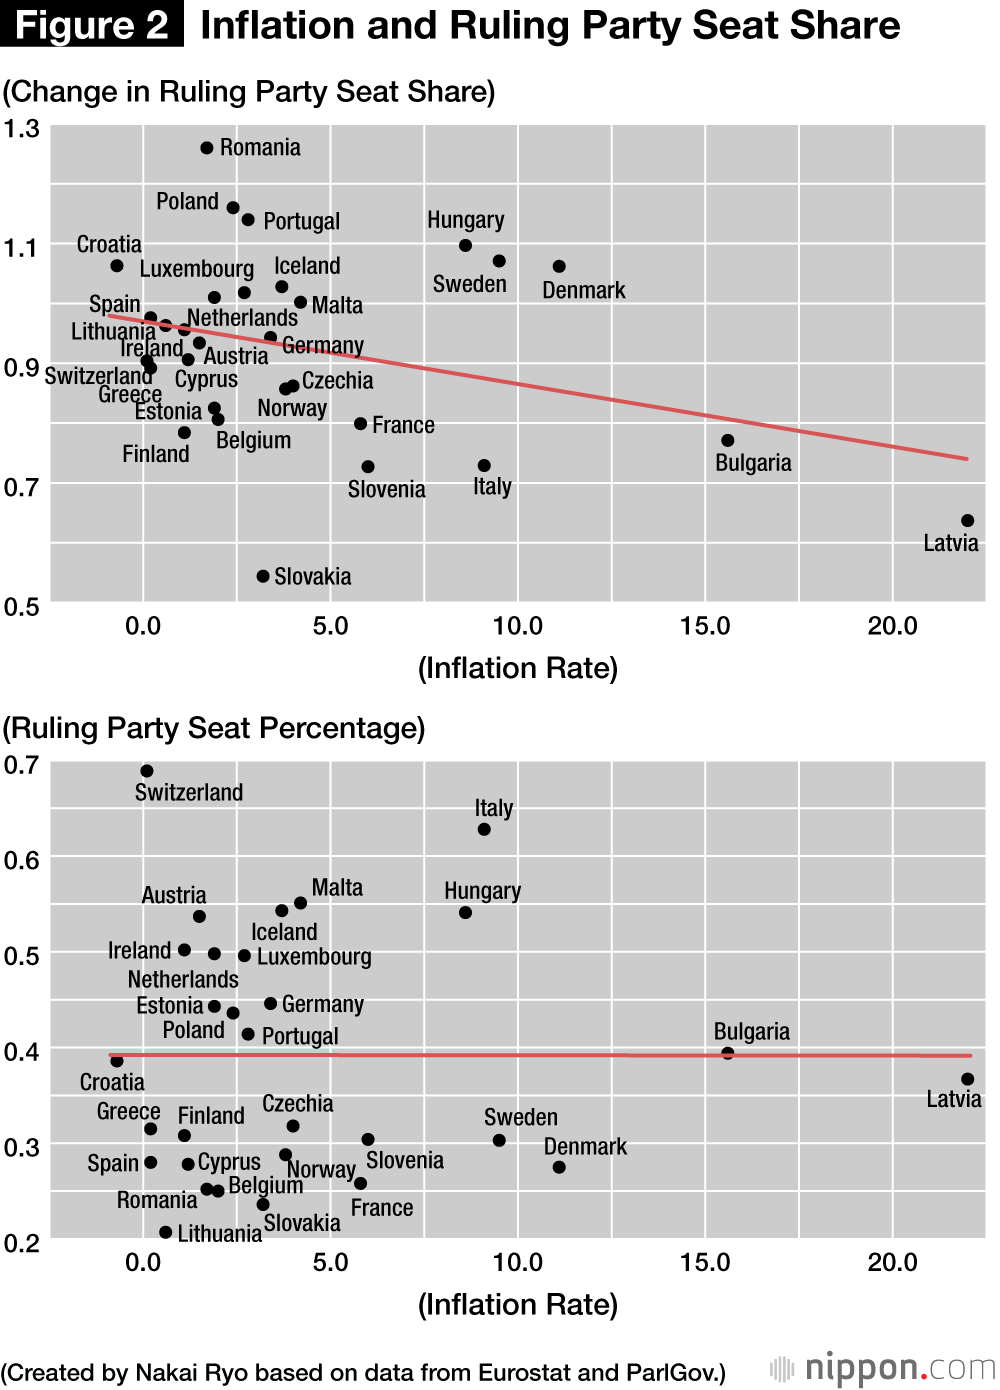 Figure 2: Inflation and Ruling Party Seat Share 